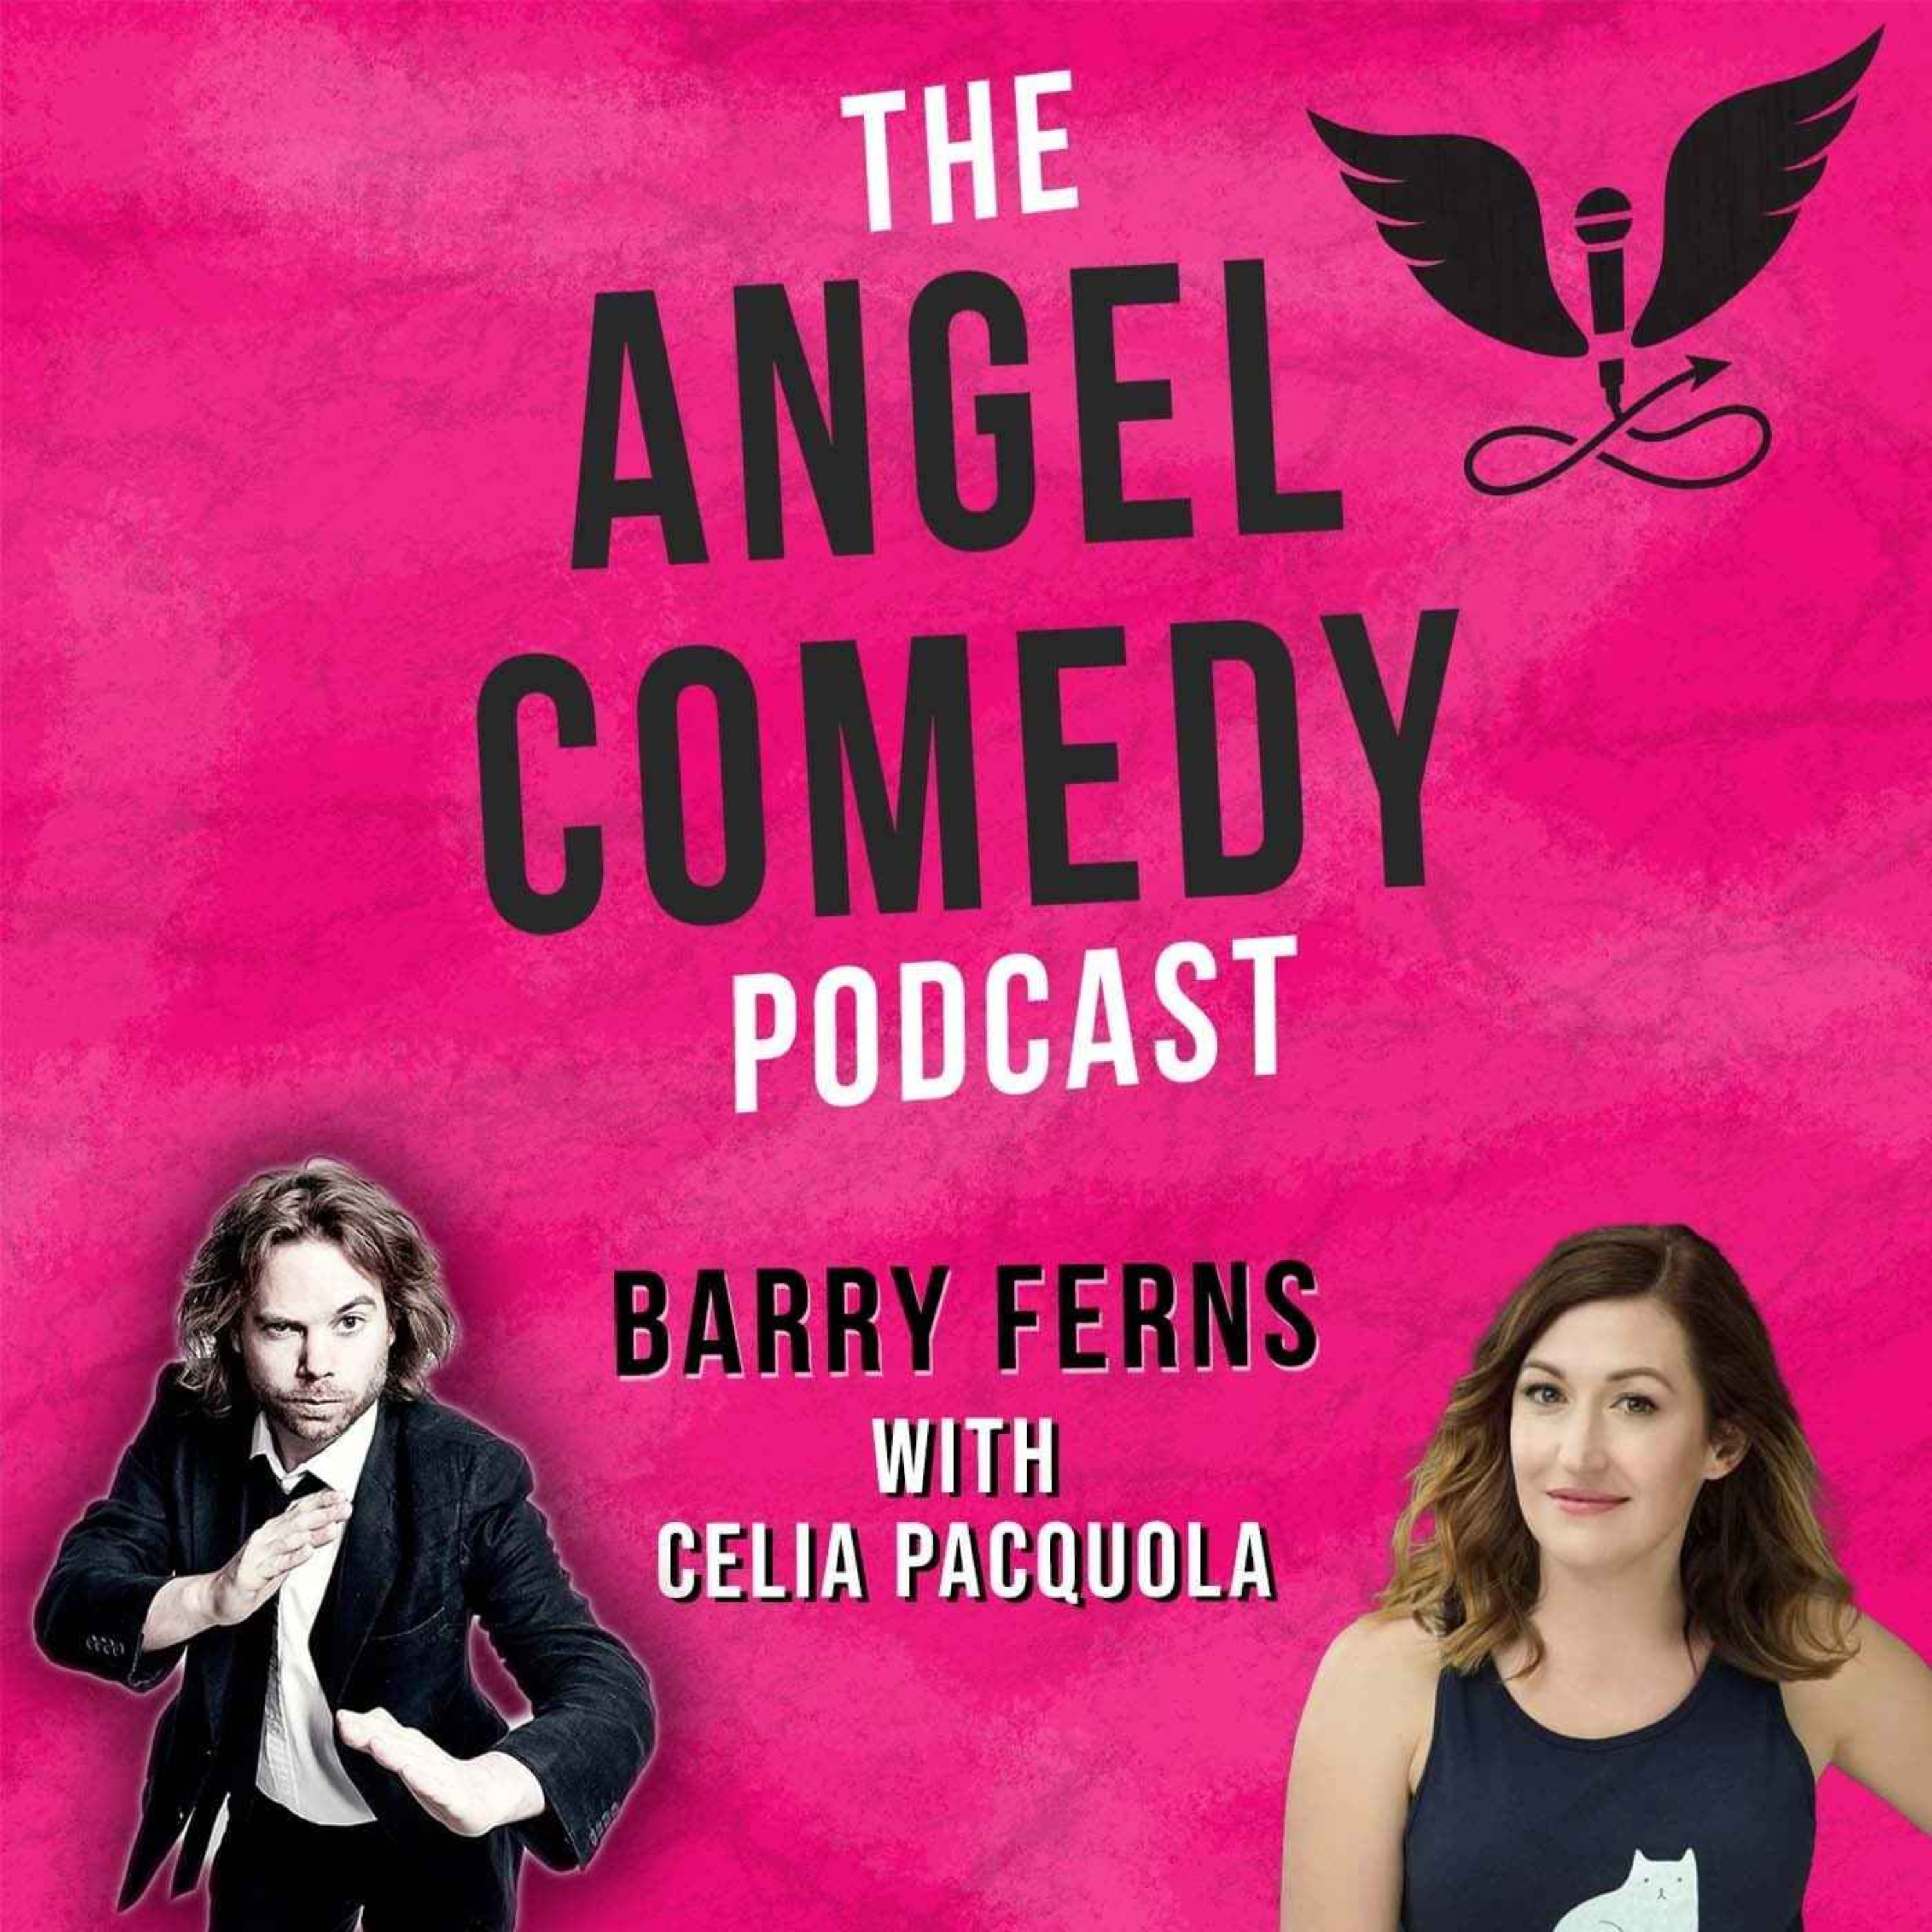 The Angel Comedy Podcast with Celia Pacquola